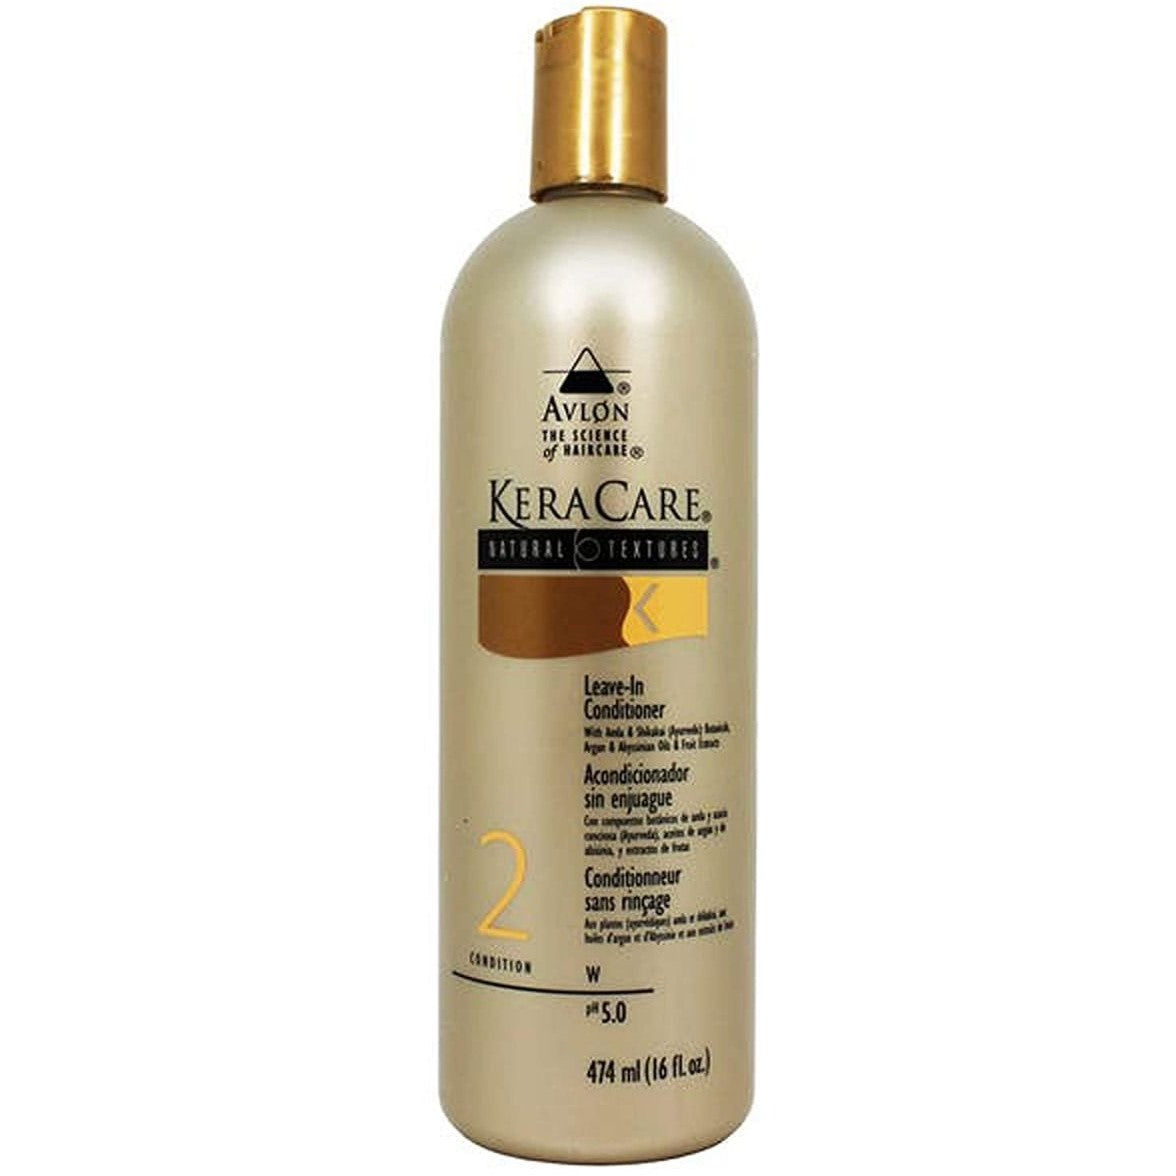 KeraCare Natural Textures Leave In Conditioner 16 oz